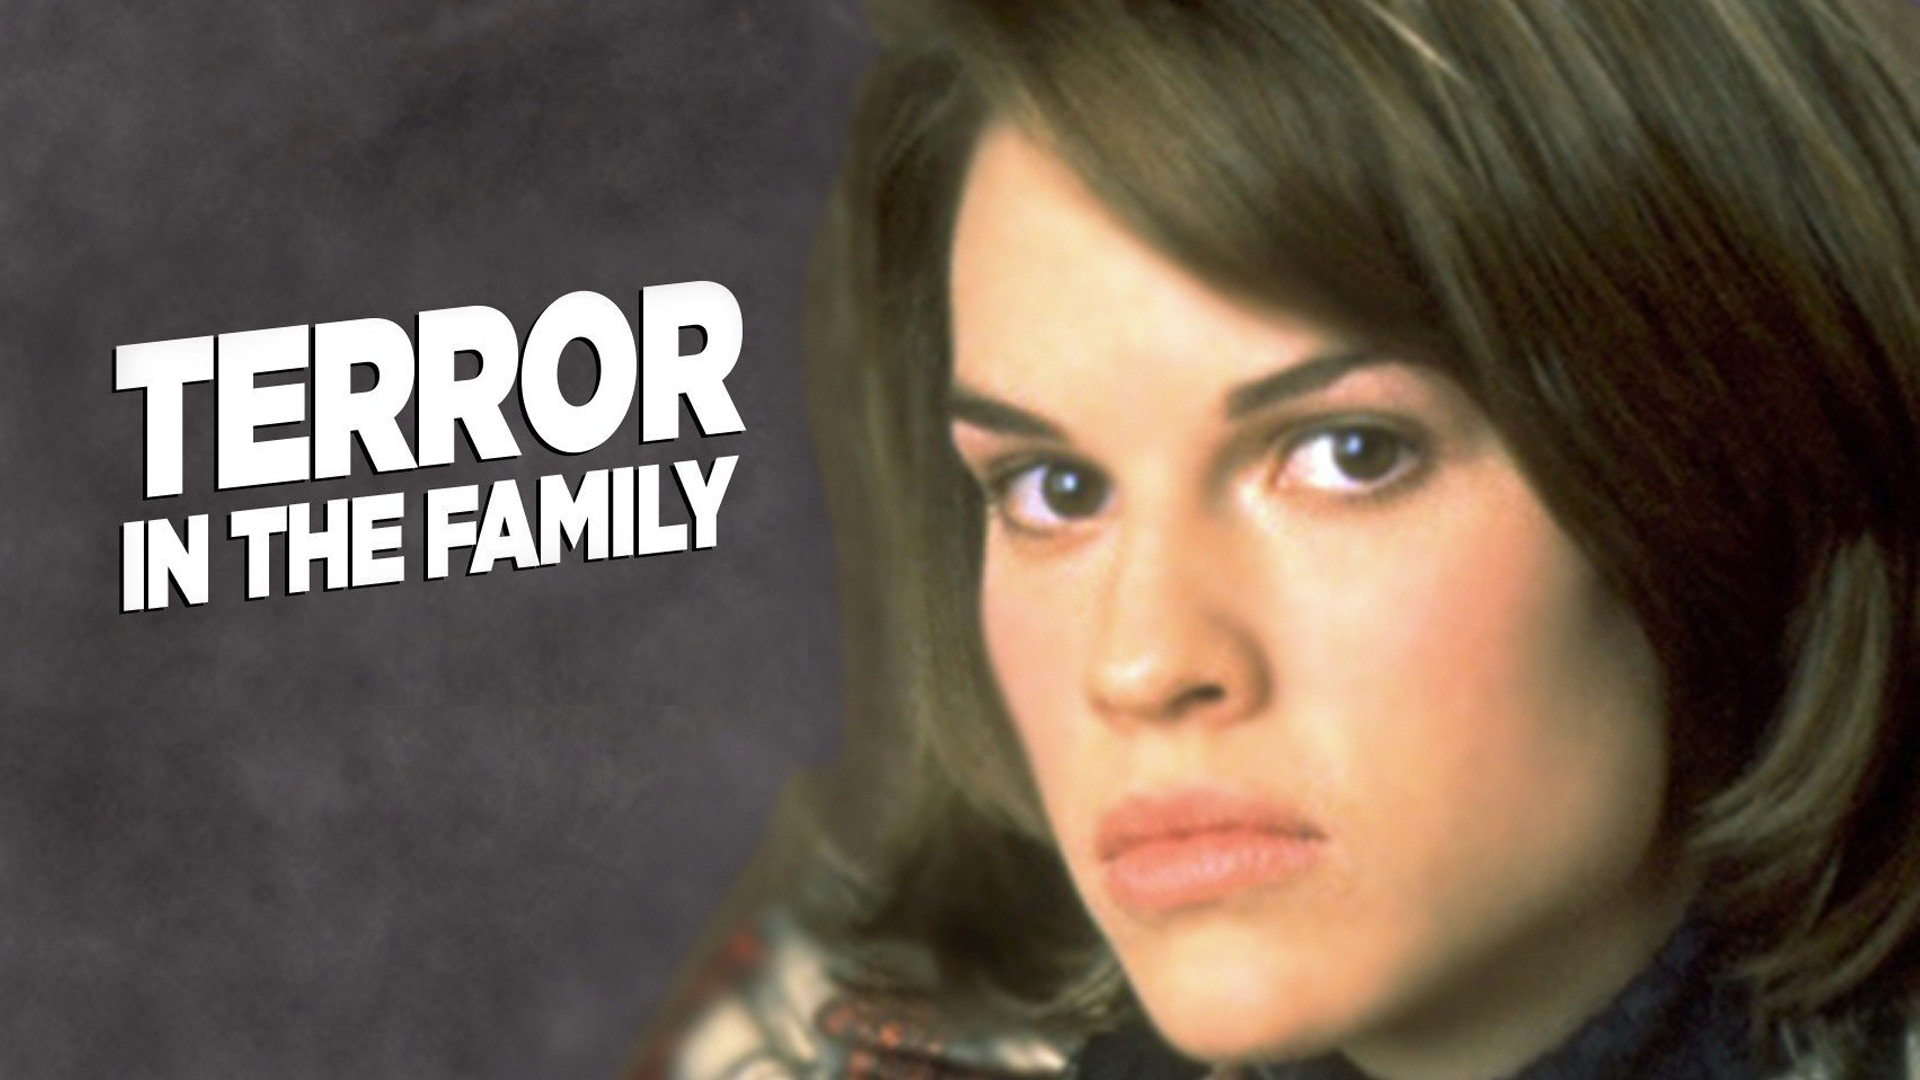 terror in the family movie review